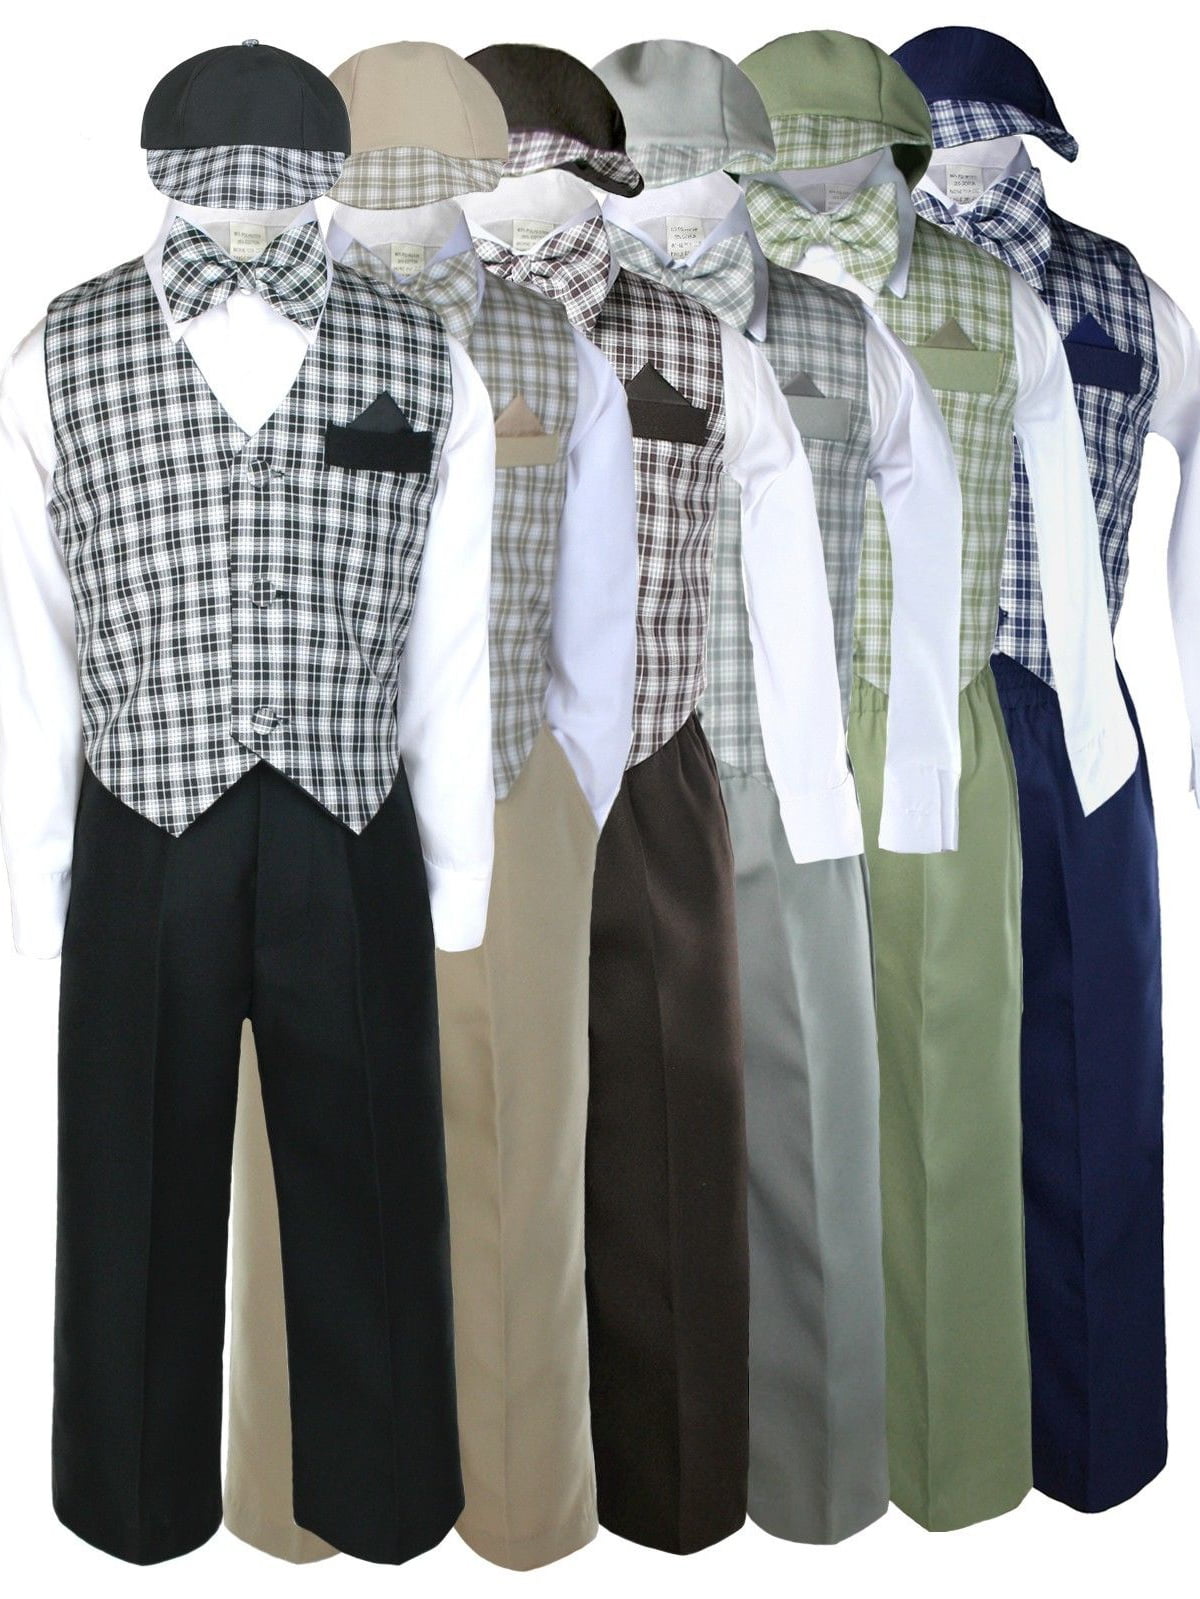 New Baby Boy Sage Green Gingham checks Easter Eton Vest 5pc Suit New born to 4T 